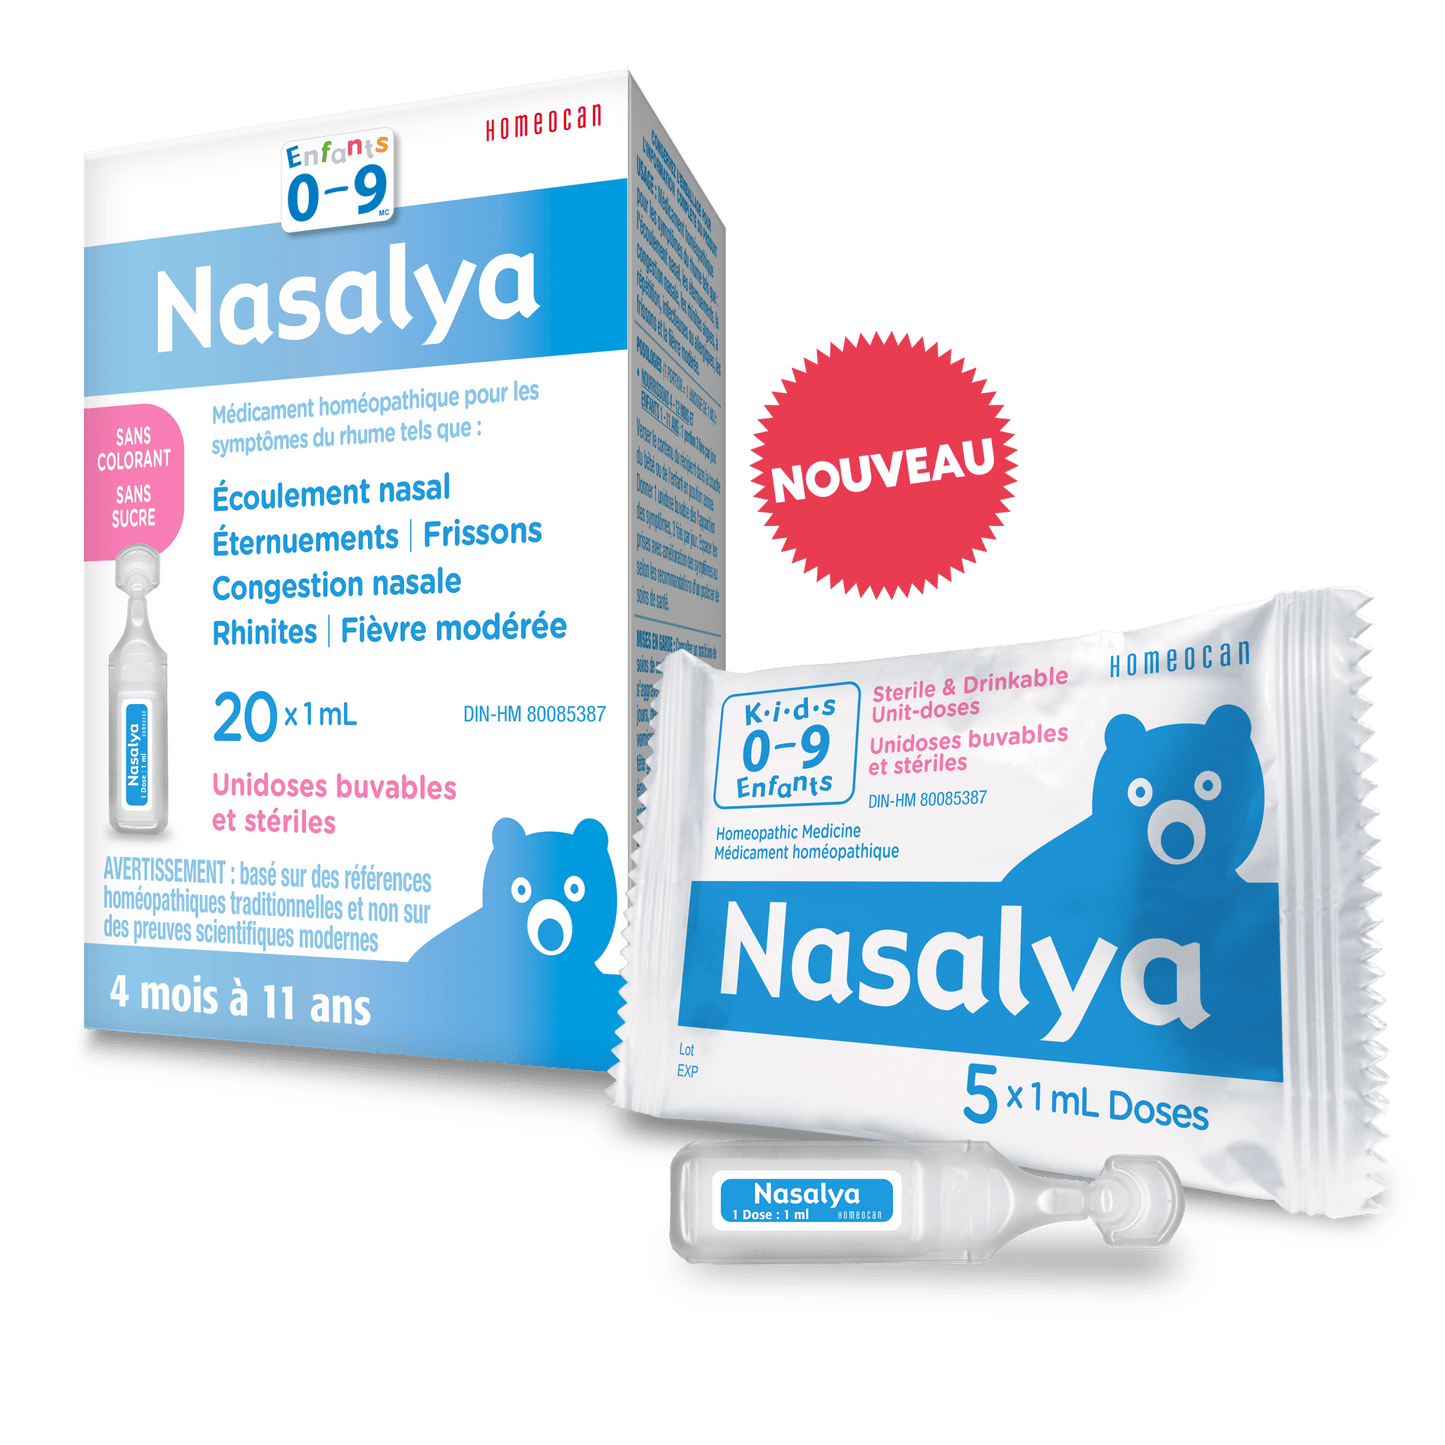 NEW! NASALYA Drinkable Solution Unit-Doses for Cold Symptoms | Kids 0-9